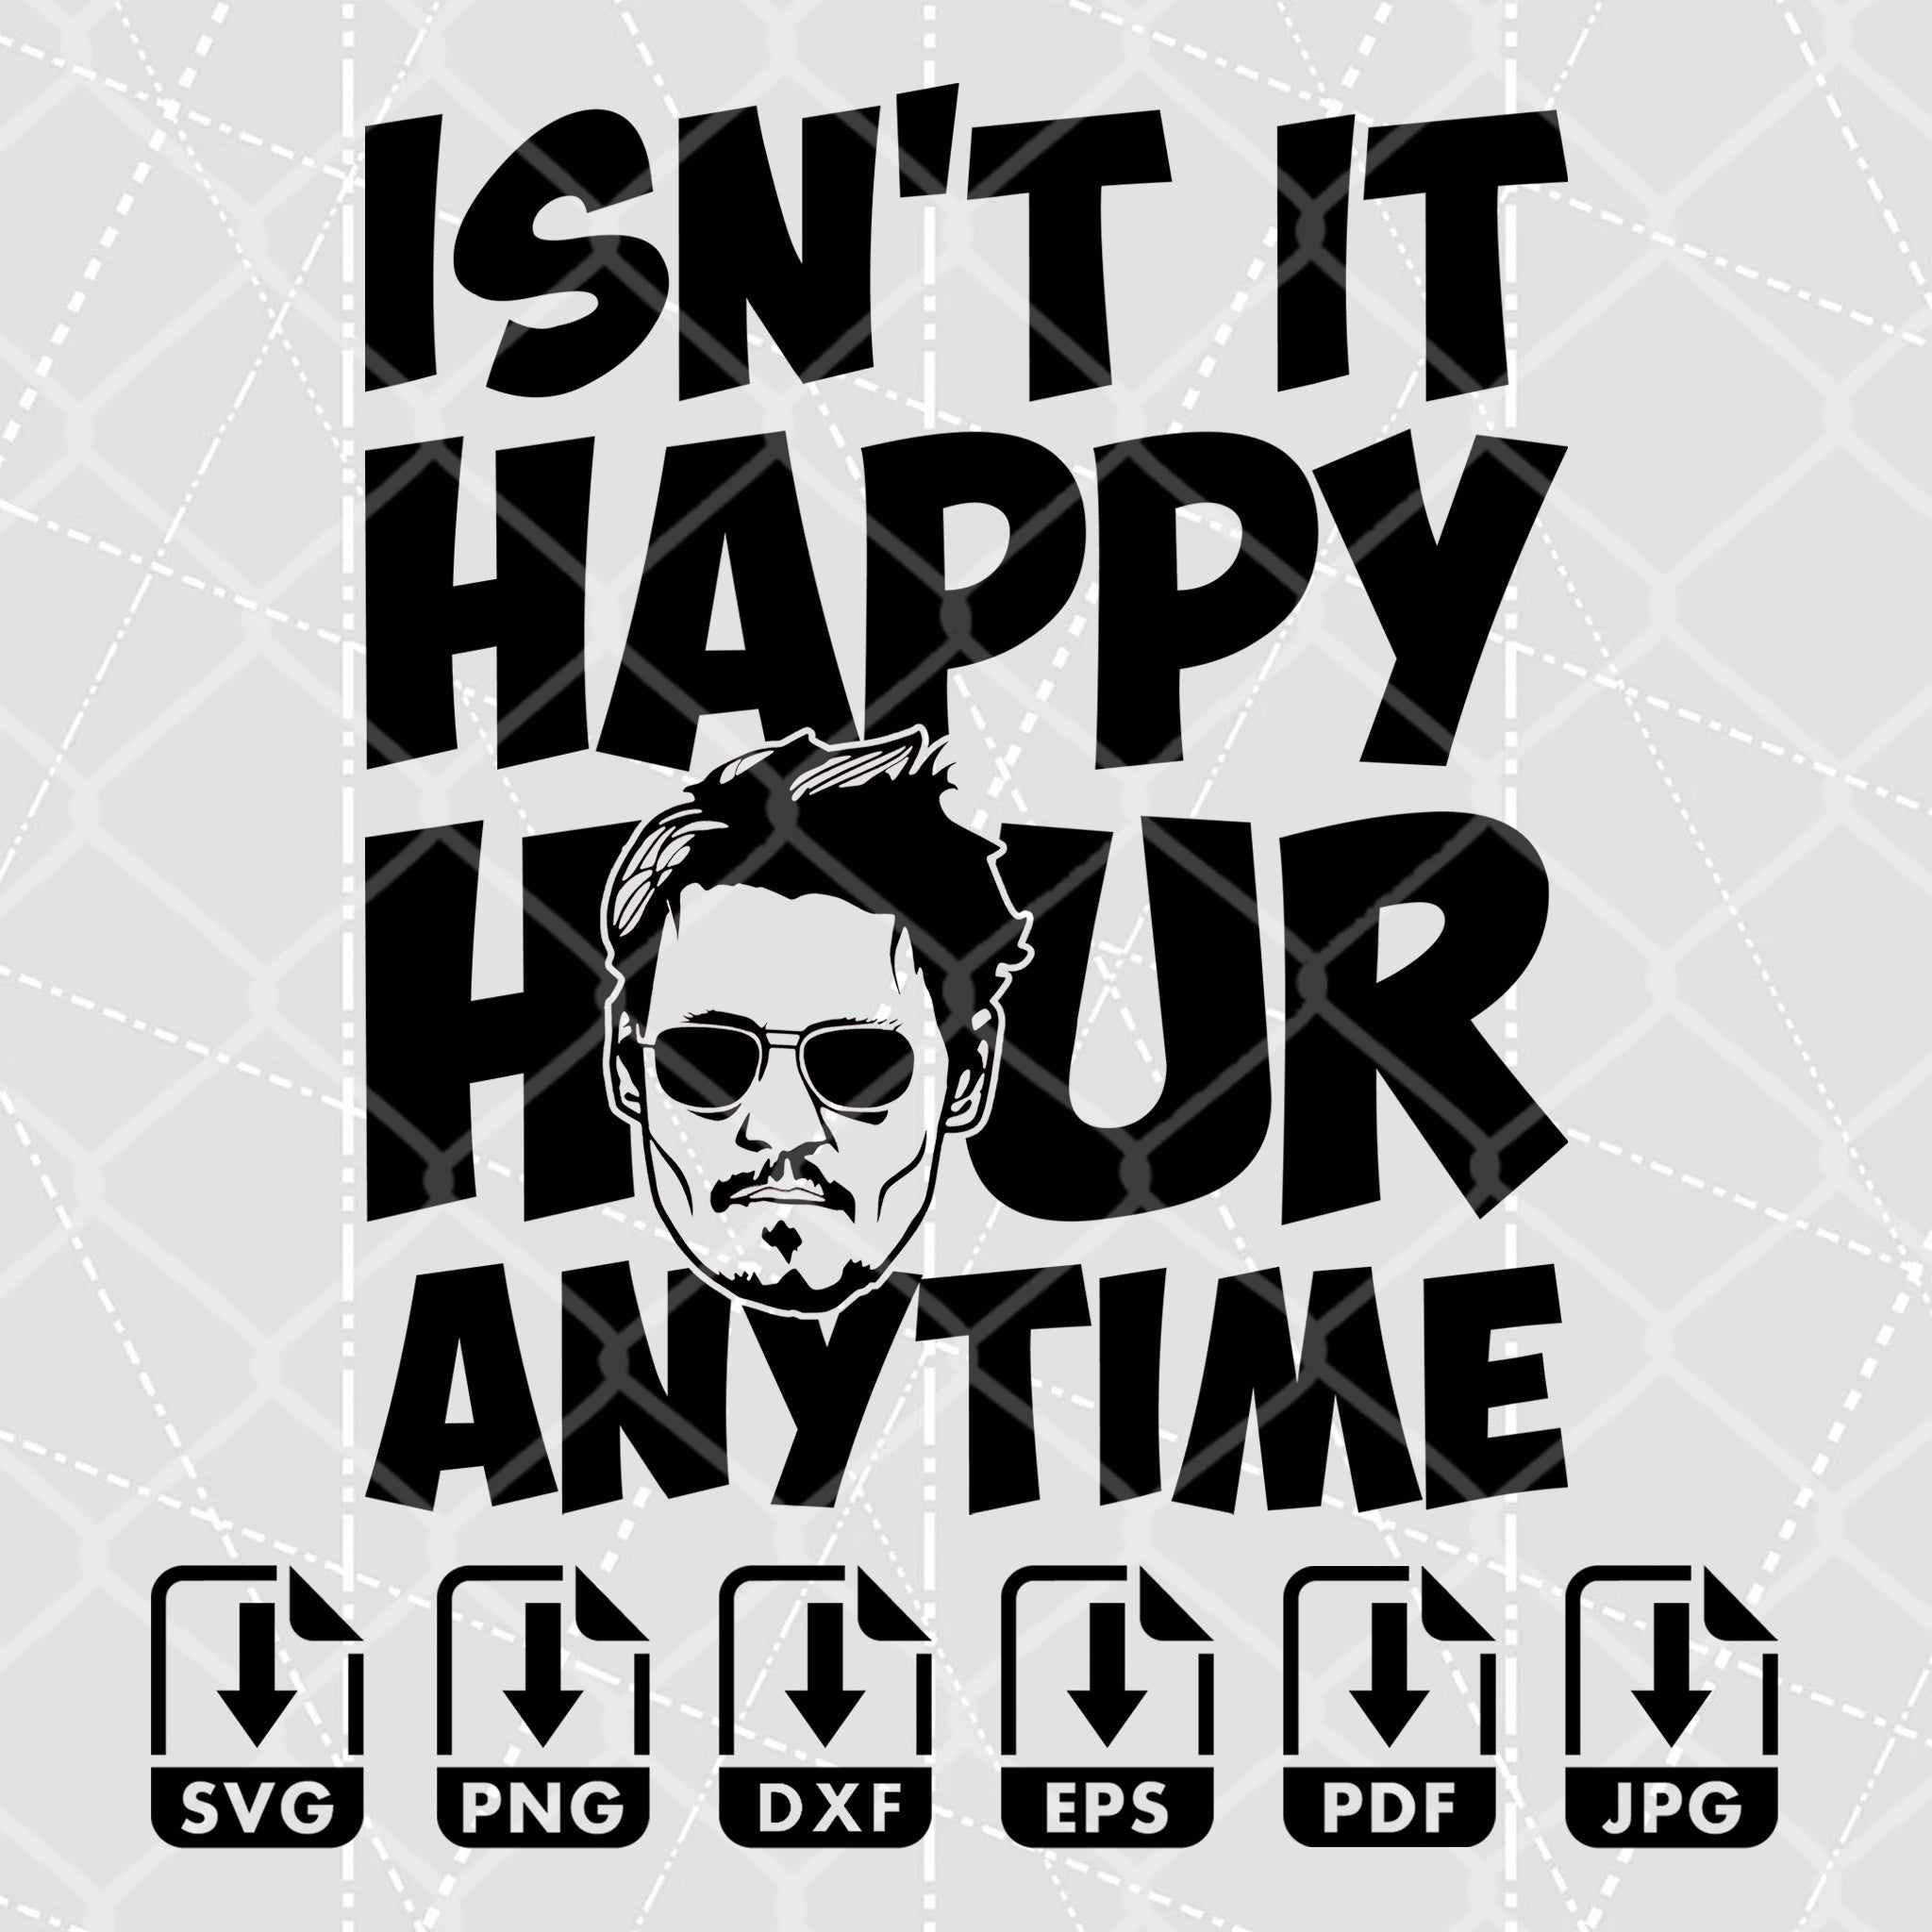 Isn't Happy Hour Anytime